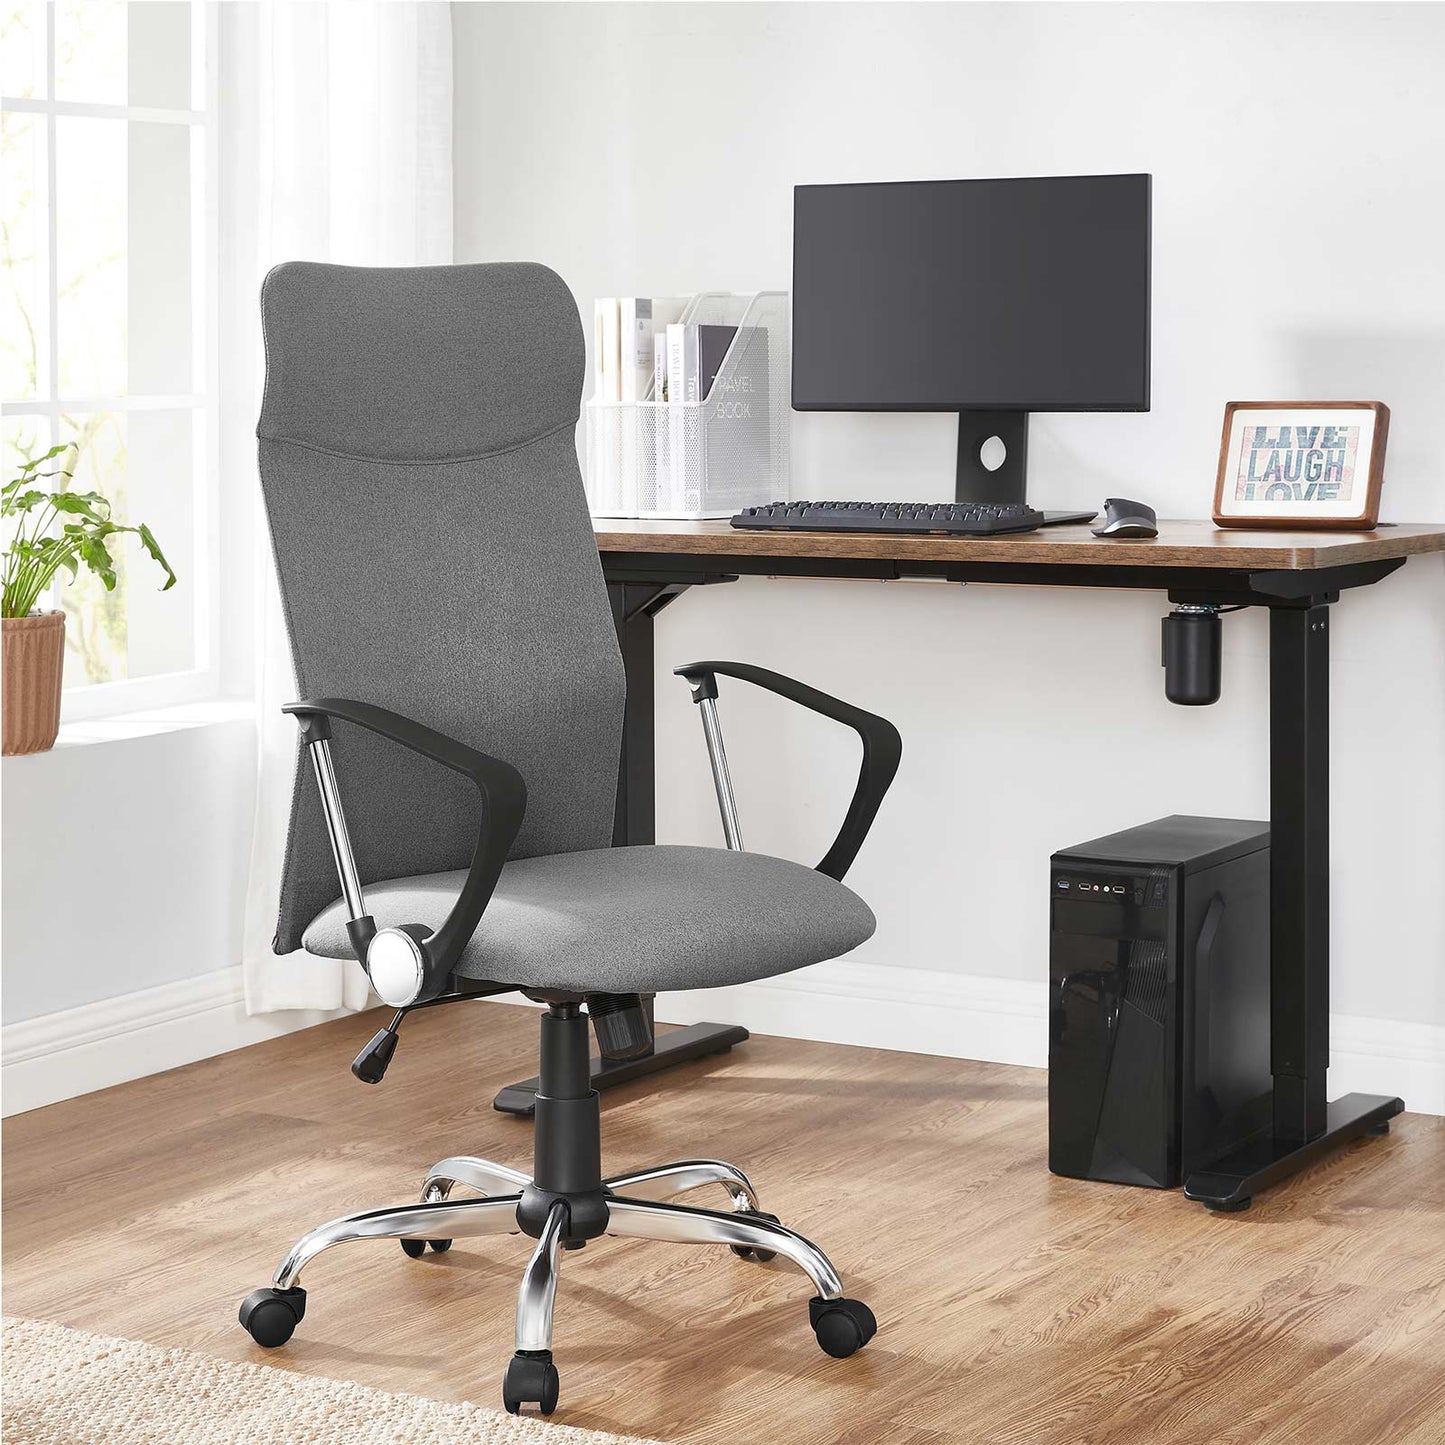 Ergonomic desk chair with upholstered seat